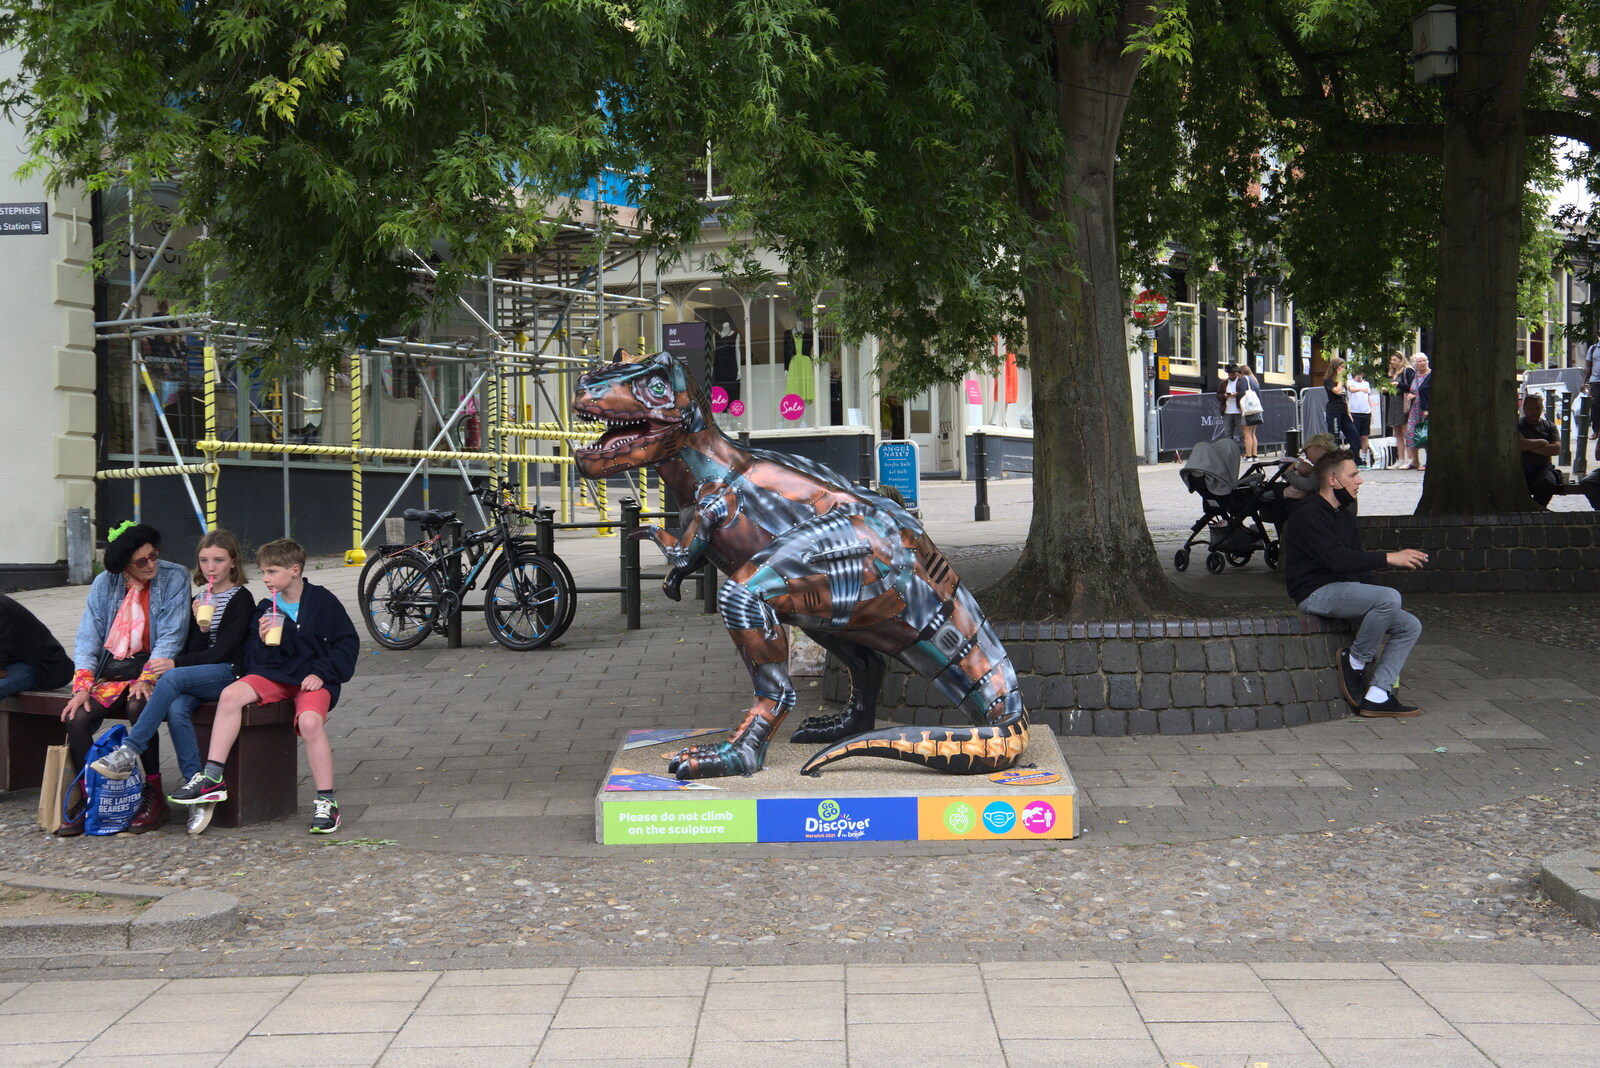 A dinosaur on Timber Hill from Dippy and the City Dinosaur Trail, Norwich, Norfolk - 19th August 2021